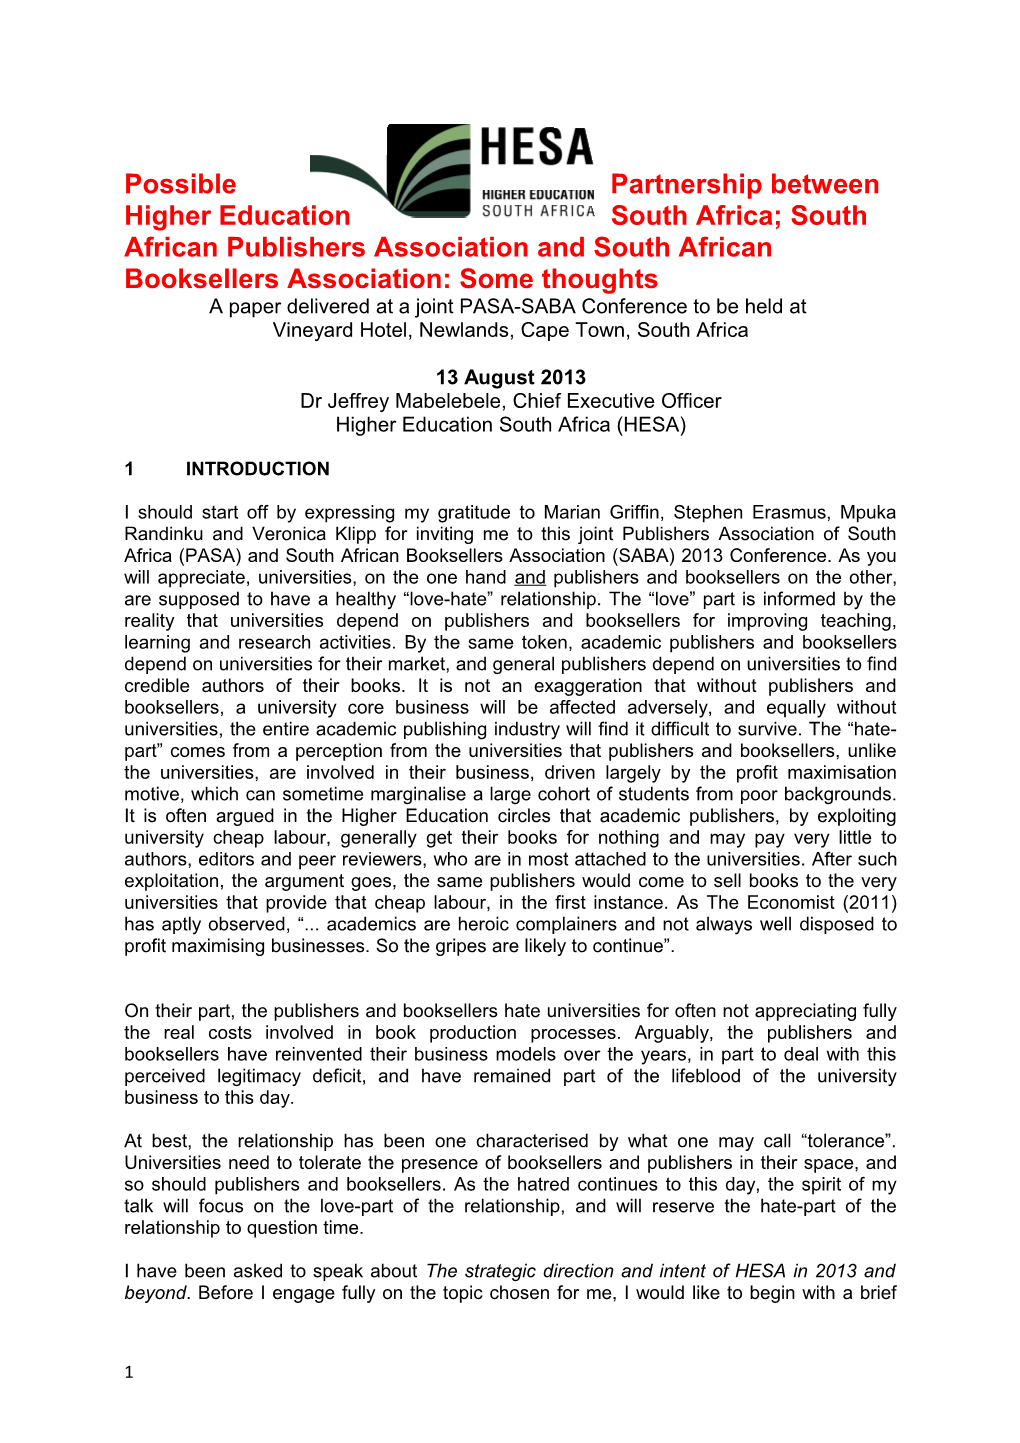 A Paper Delivered at a Joint PASA-SABA Conference to Be Held At